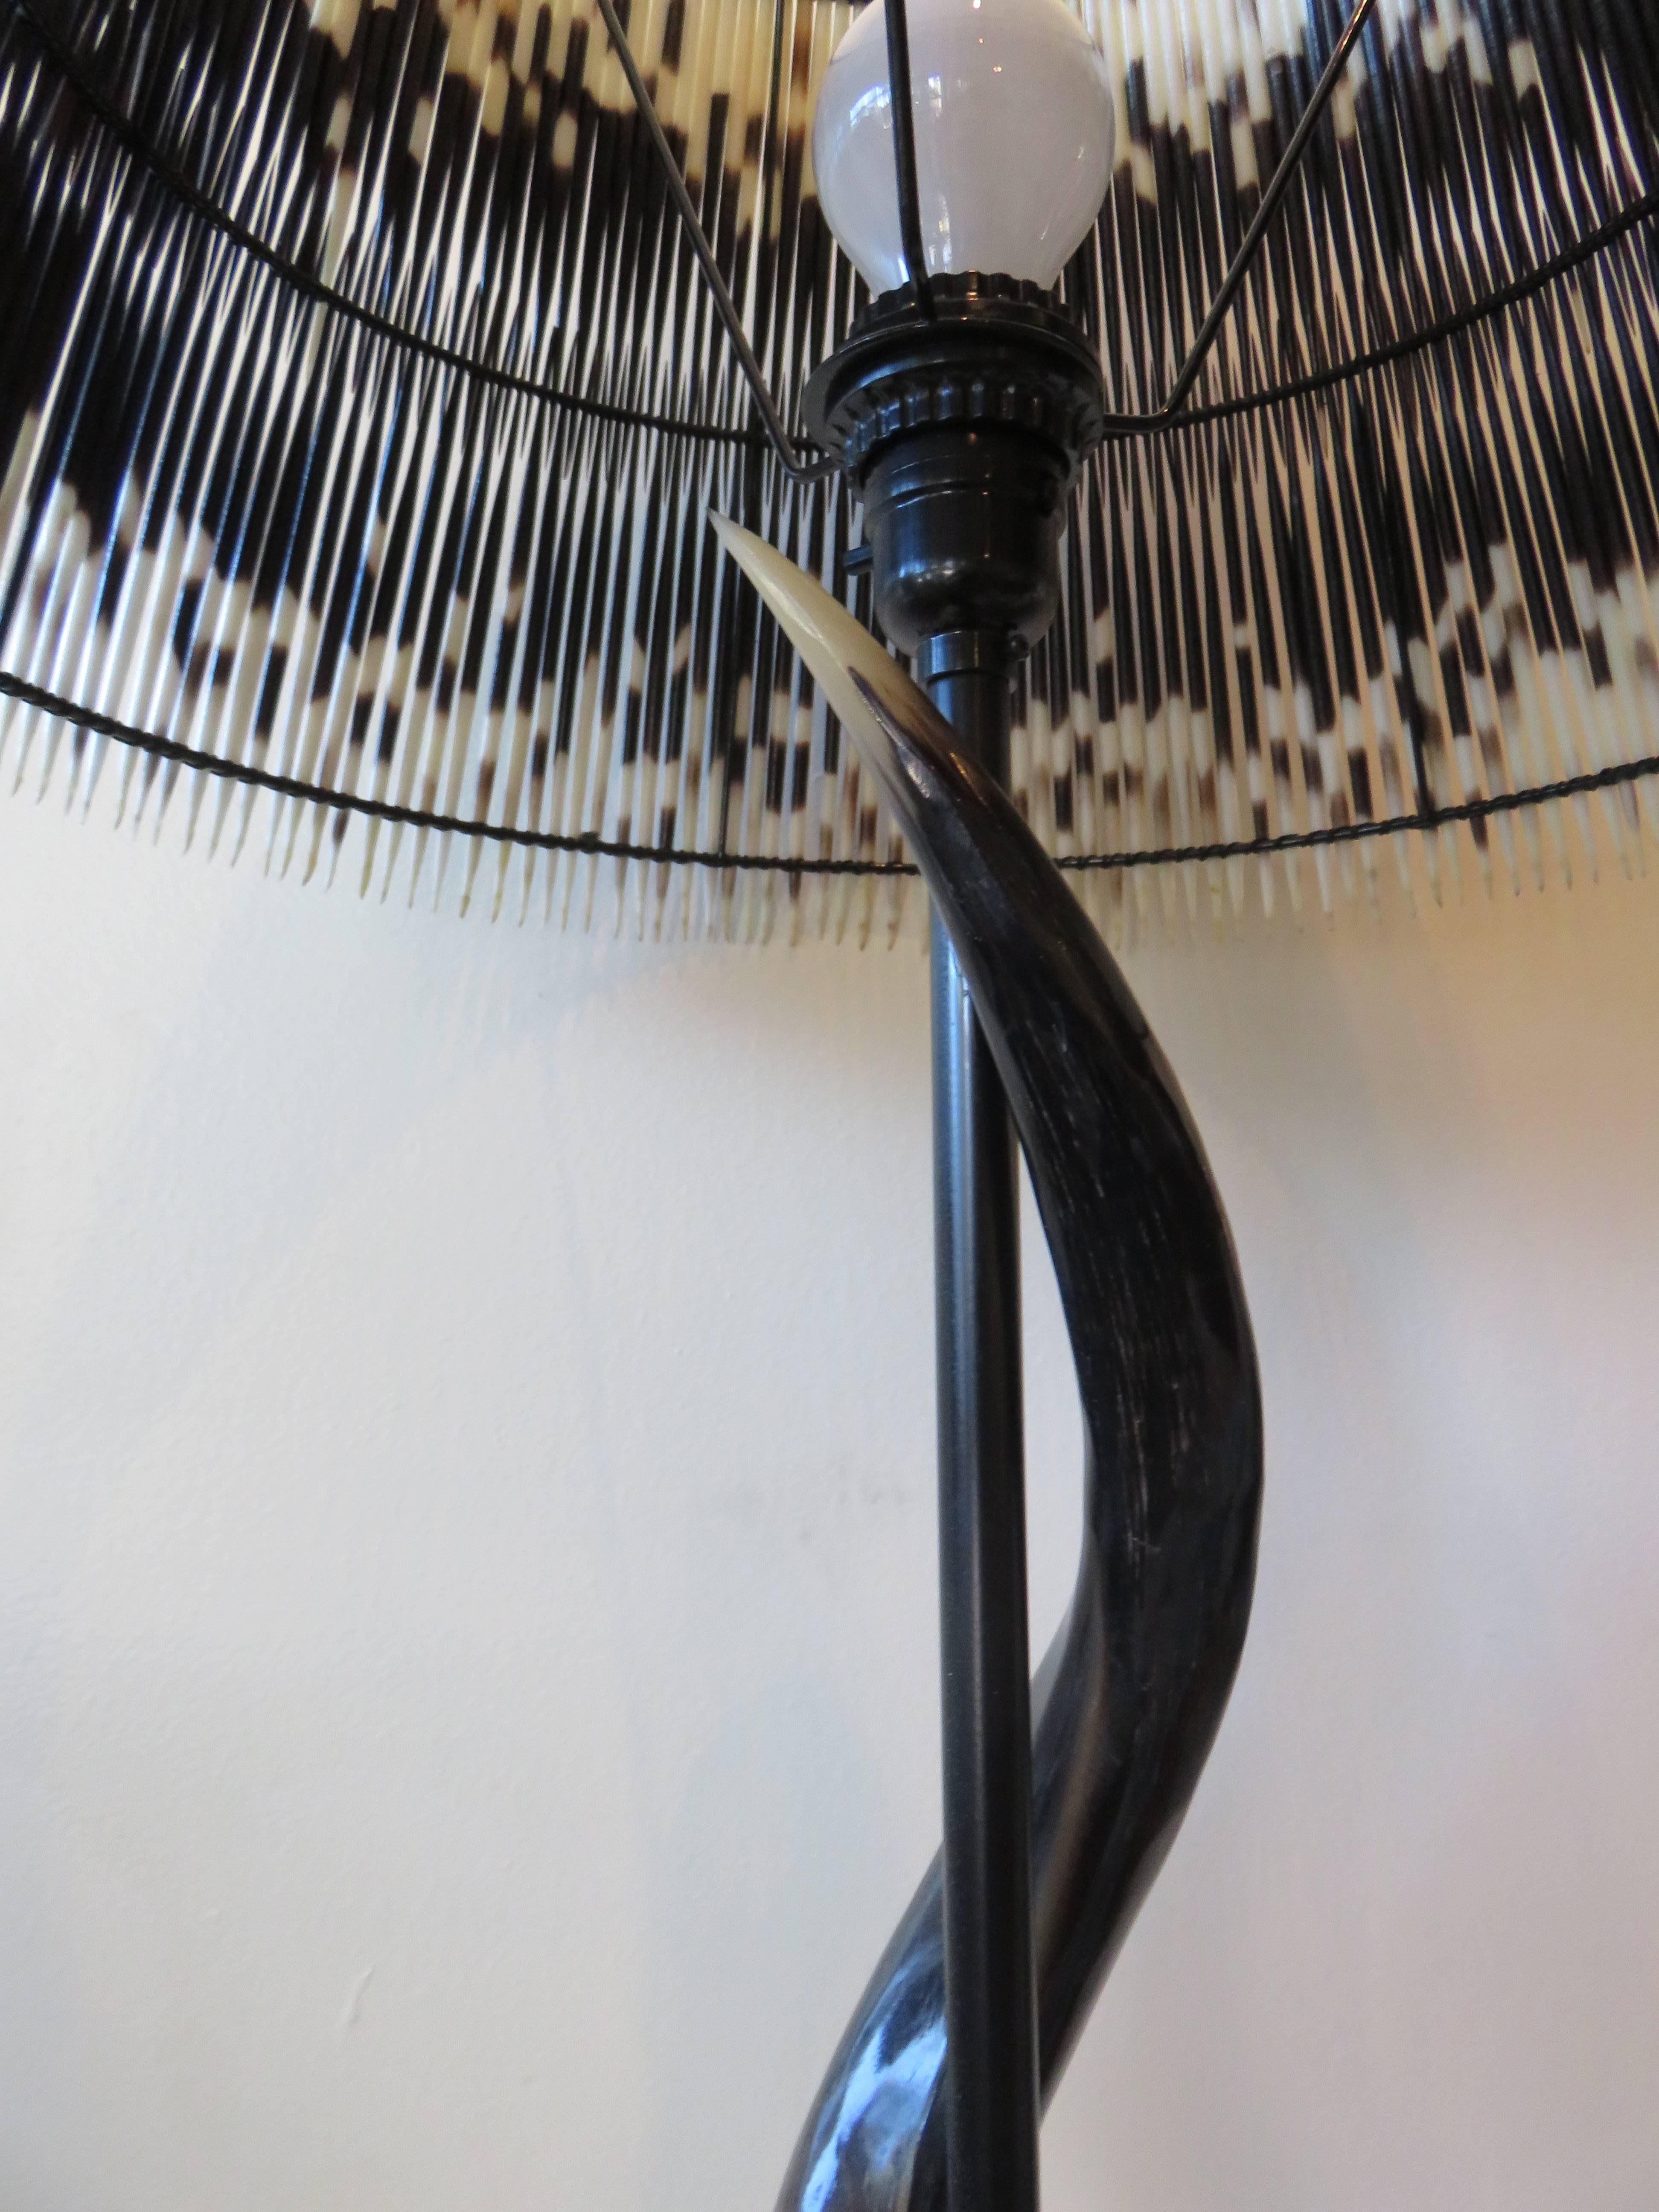 porcupine quill lamp shades